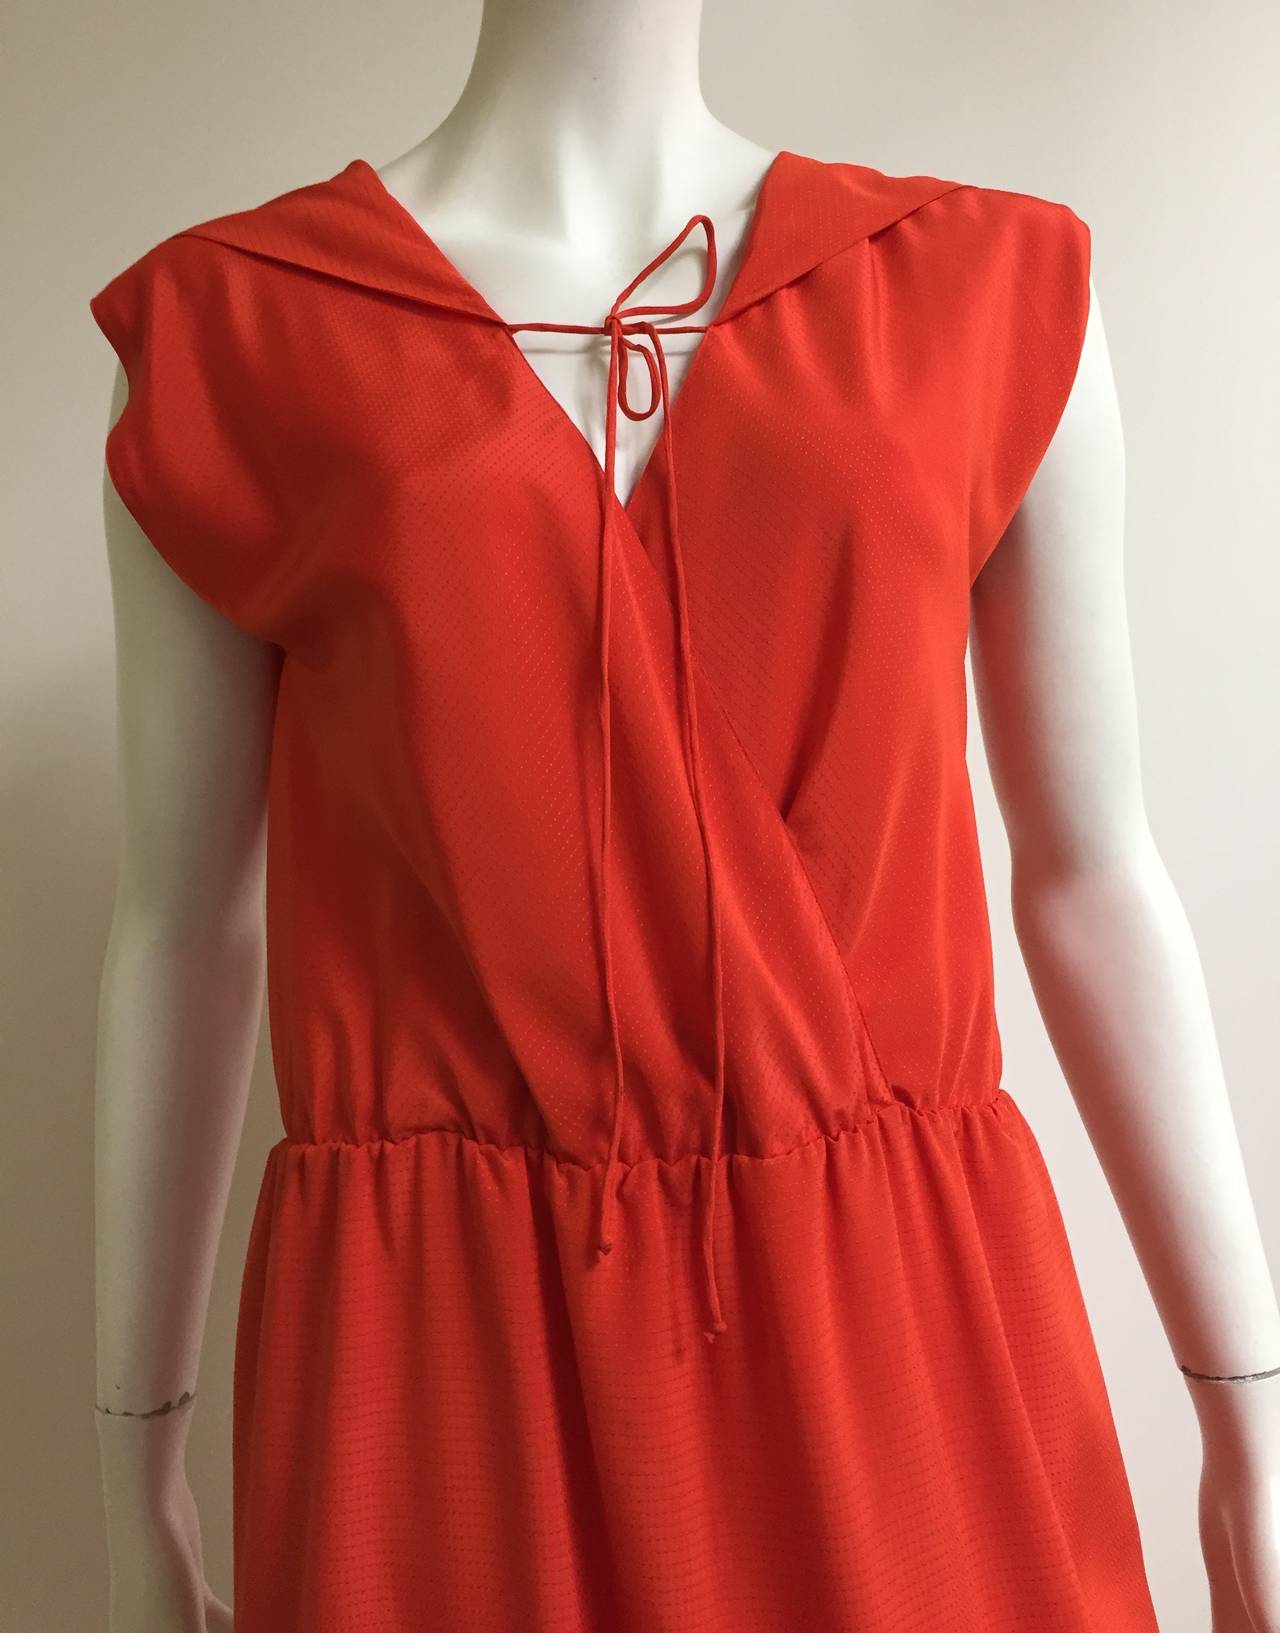 Pauline Trigere 1980s orange dress with tie string at neckline and elastic waistband. Dress is lined. Original size is small but fits today like a modern day 10 /12 but please see & use measurements. Ladies please use your measuring tape so you